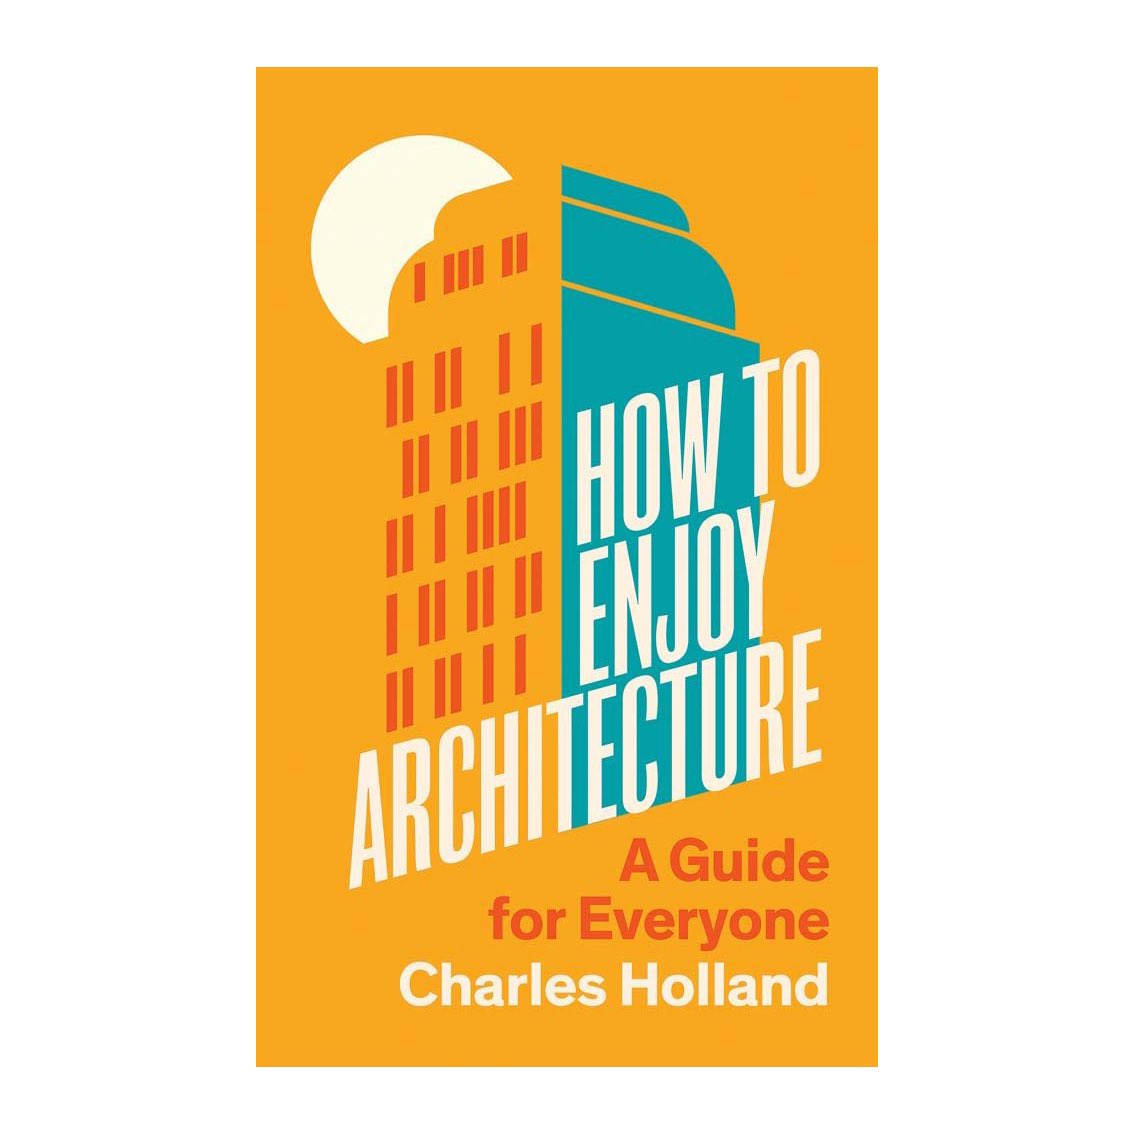 It’s out! My latest and indeed first ever book is published today. How To Enjoy Architecture: A Guide for Everyone, published by @yalepress, approaches architecture as a source of profound pleasure and enjoyment.